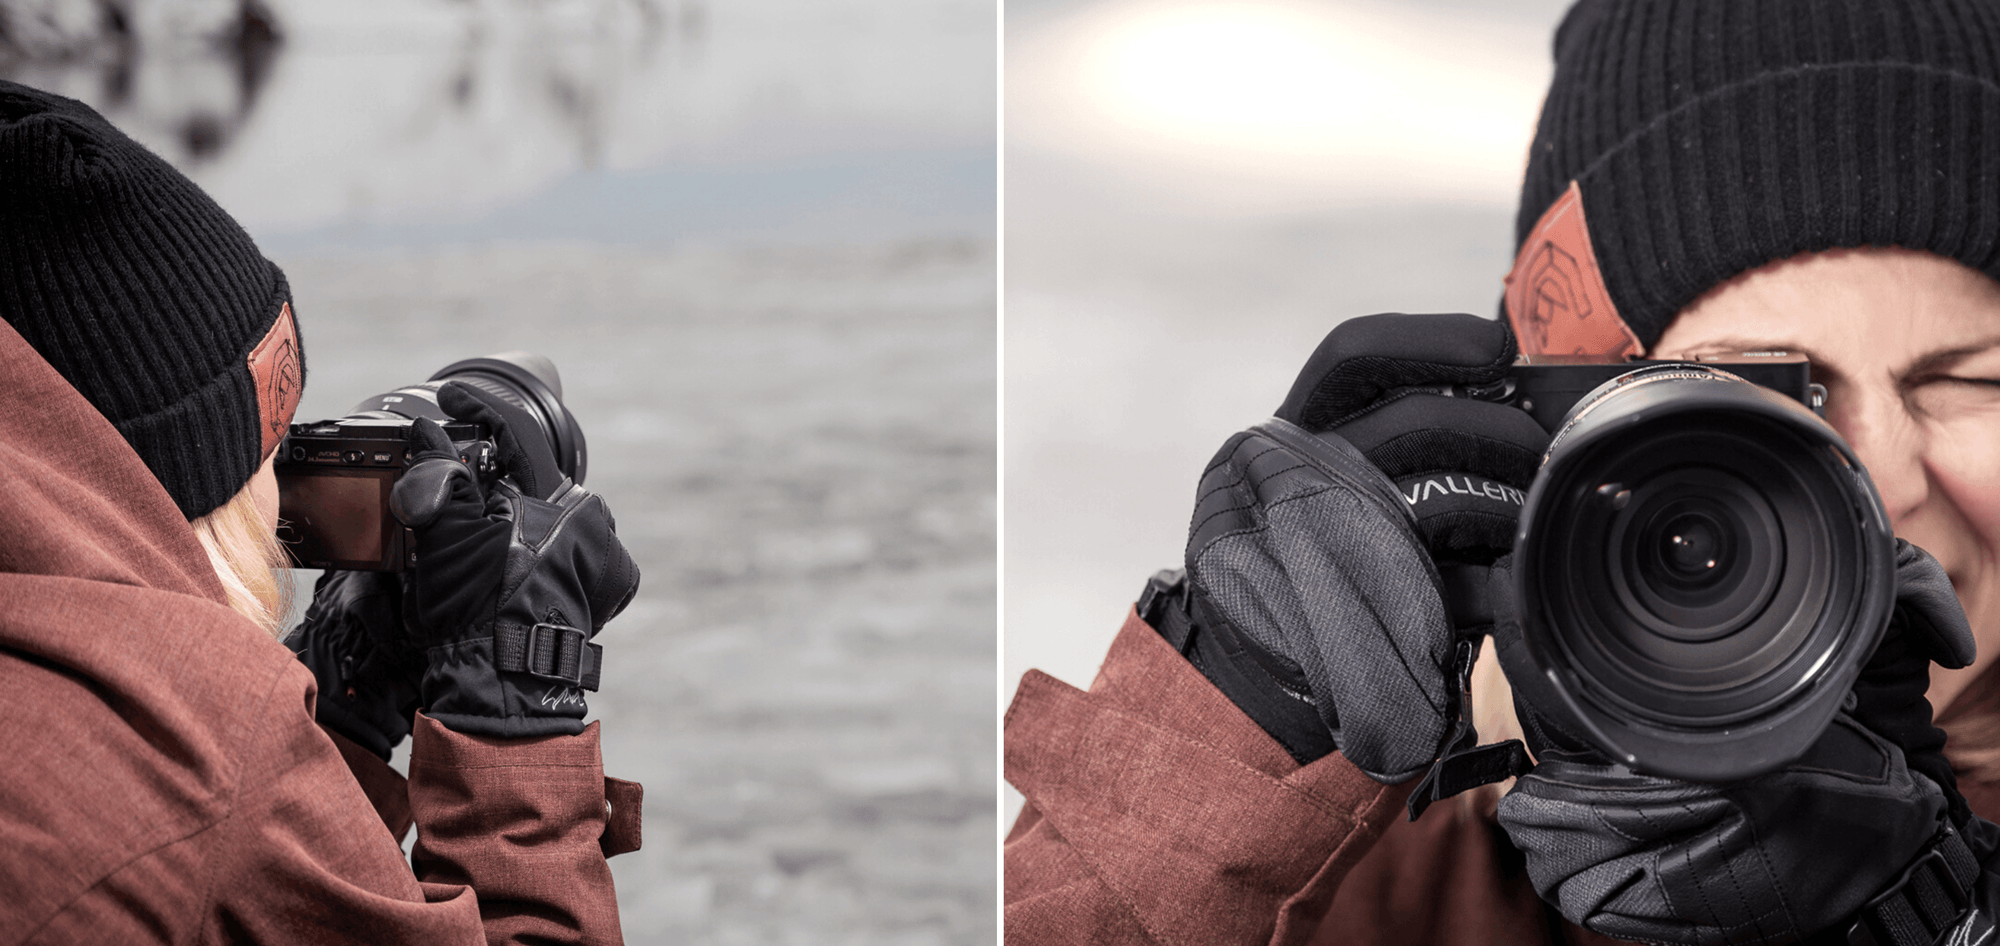 The Goddess of Winter in the Shape of a Photography Glove